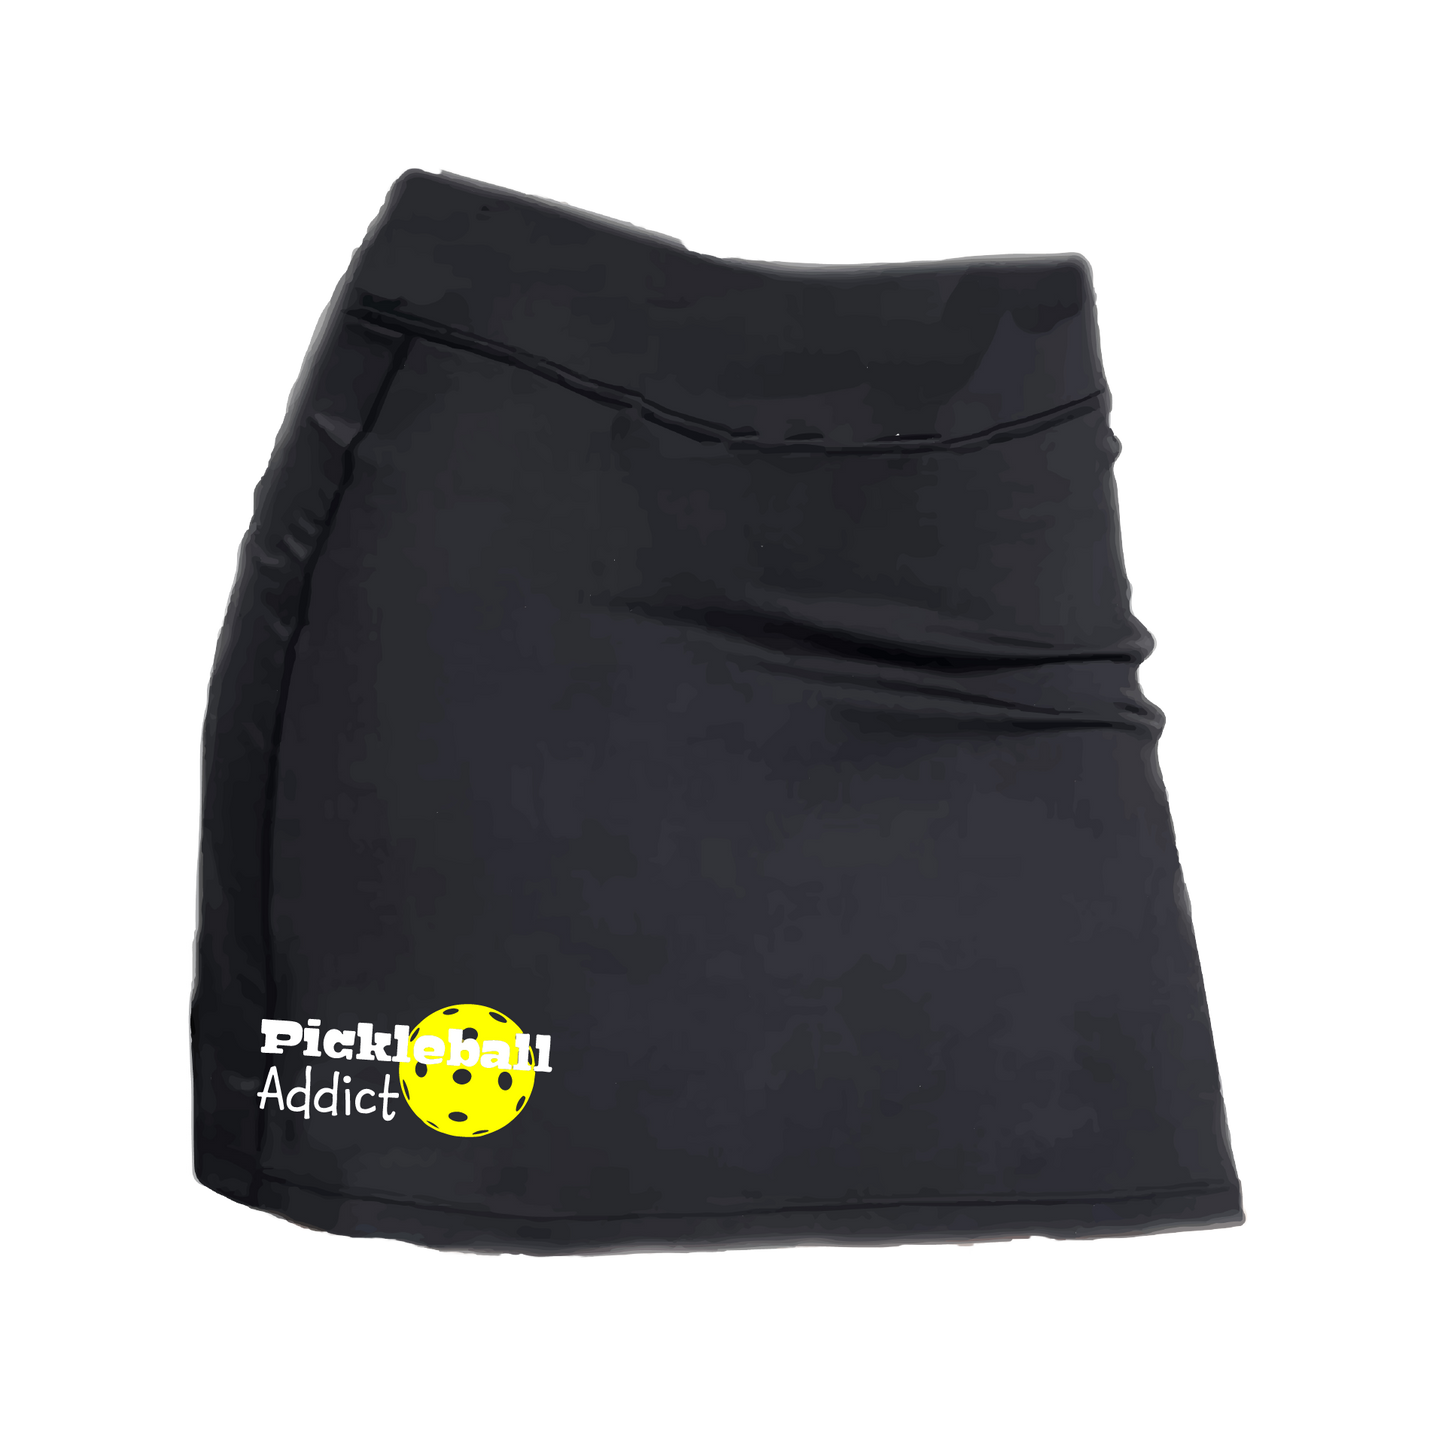 Pickleball Skort Design: Pickleball Addict  Women’s core active jersey-knit skort comes with built-in shorts made out of a poly-spandex blend that will keep your legs from rubbing together, without which often results in painful chafing. You can also feel secure knowing that no matter how strenuous the exercise, the skort will remain in place (it won’t ride up!).